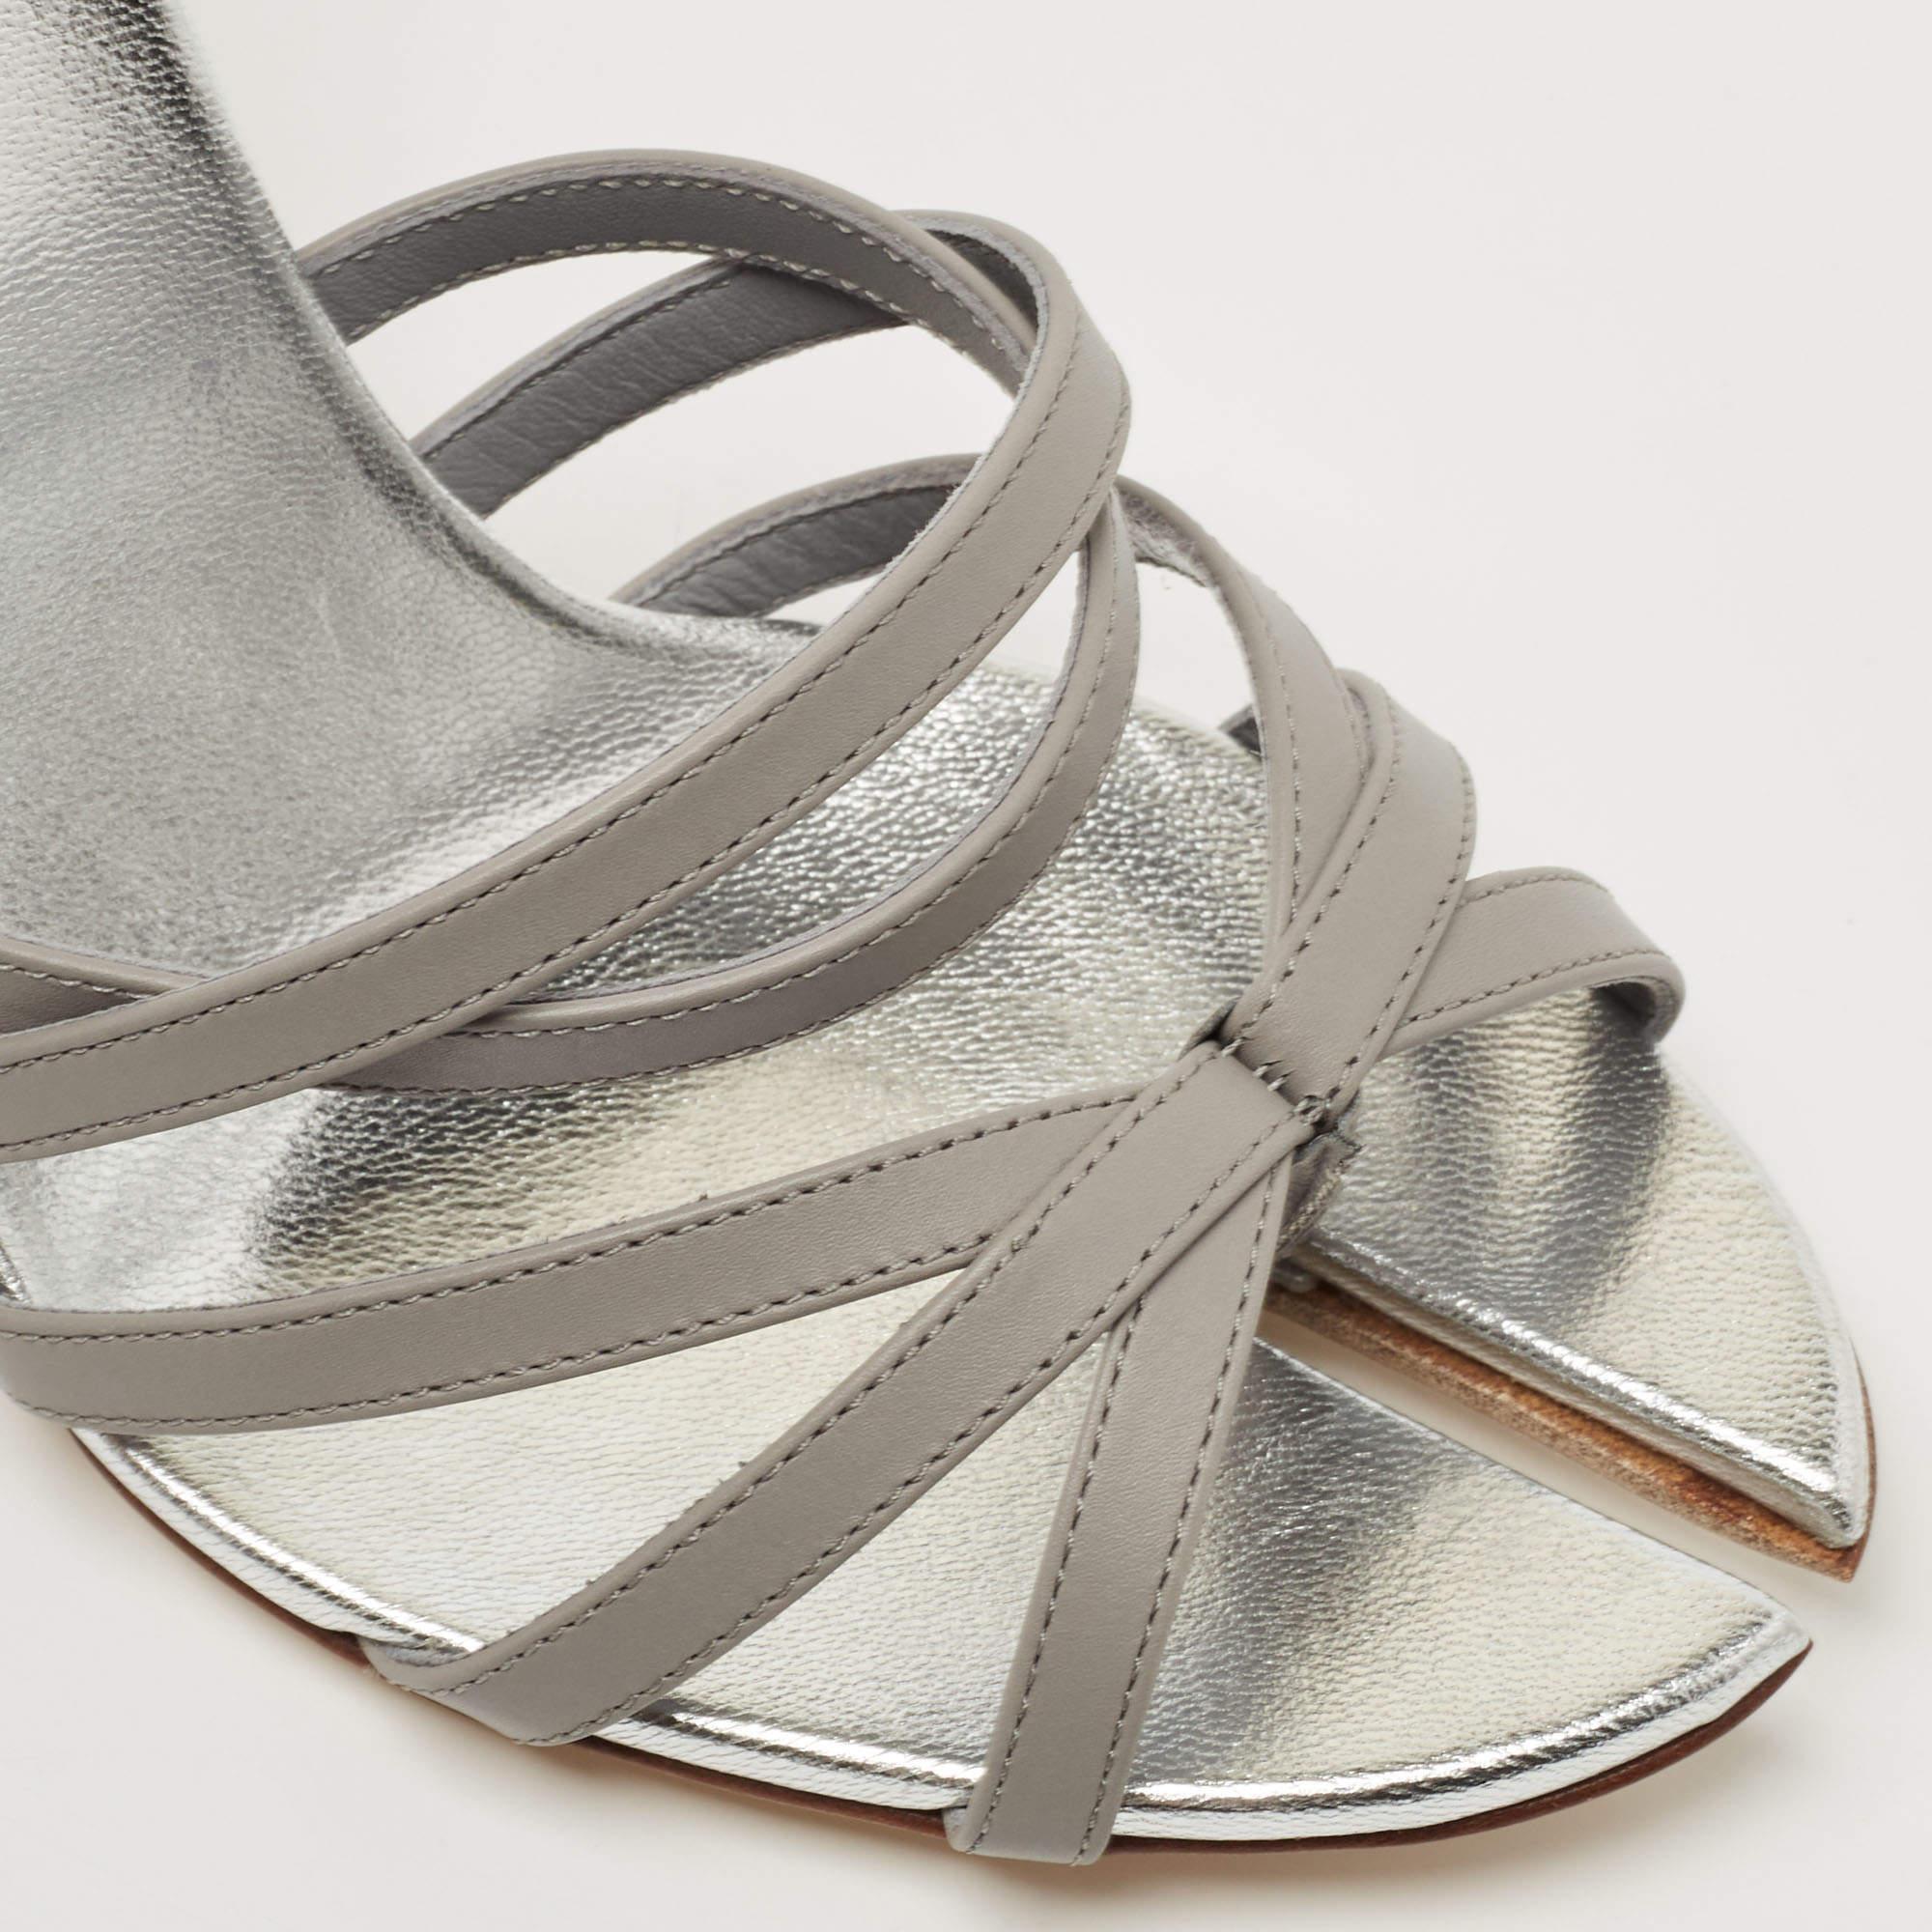 Burberry Grey Leather Hove Heel Ankle Strap Sandals Size 39 4